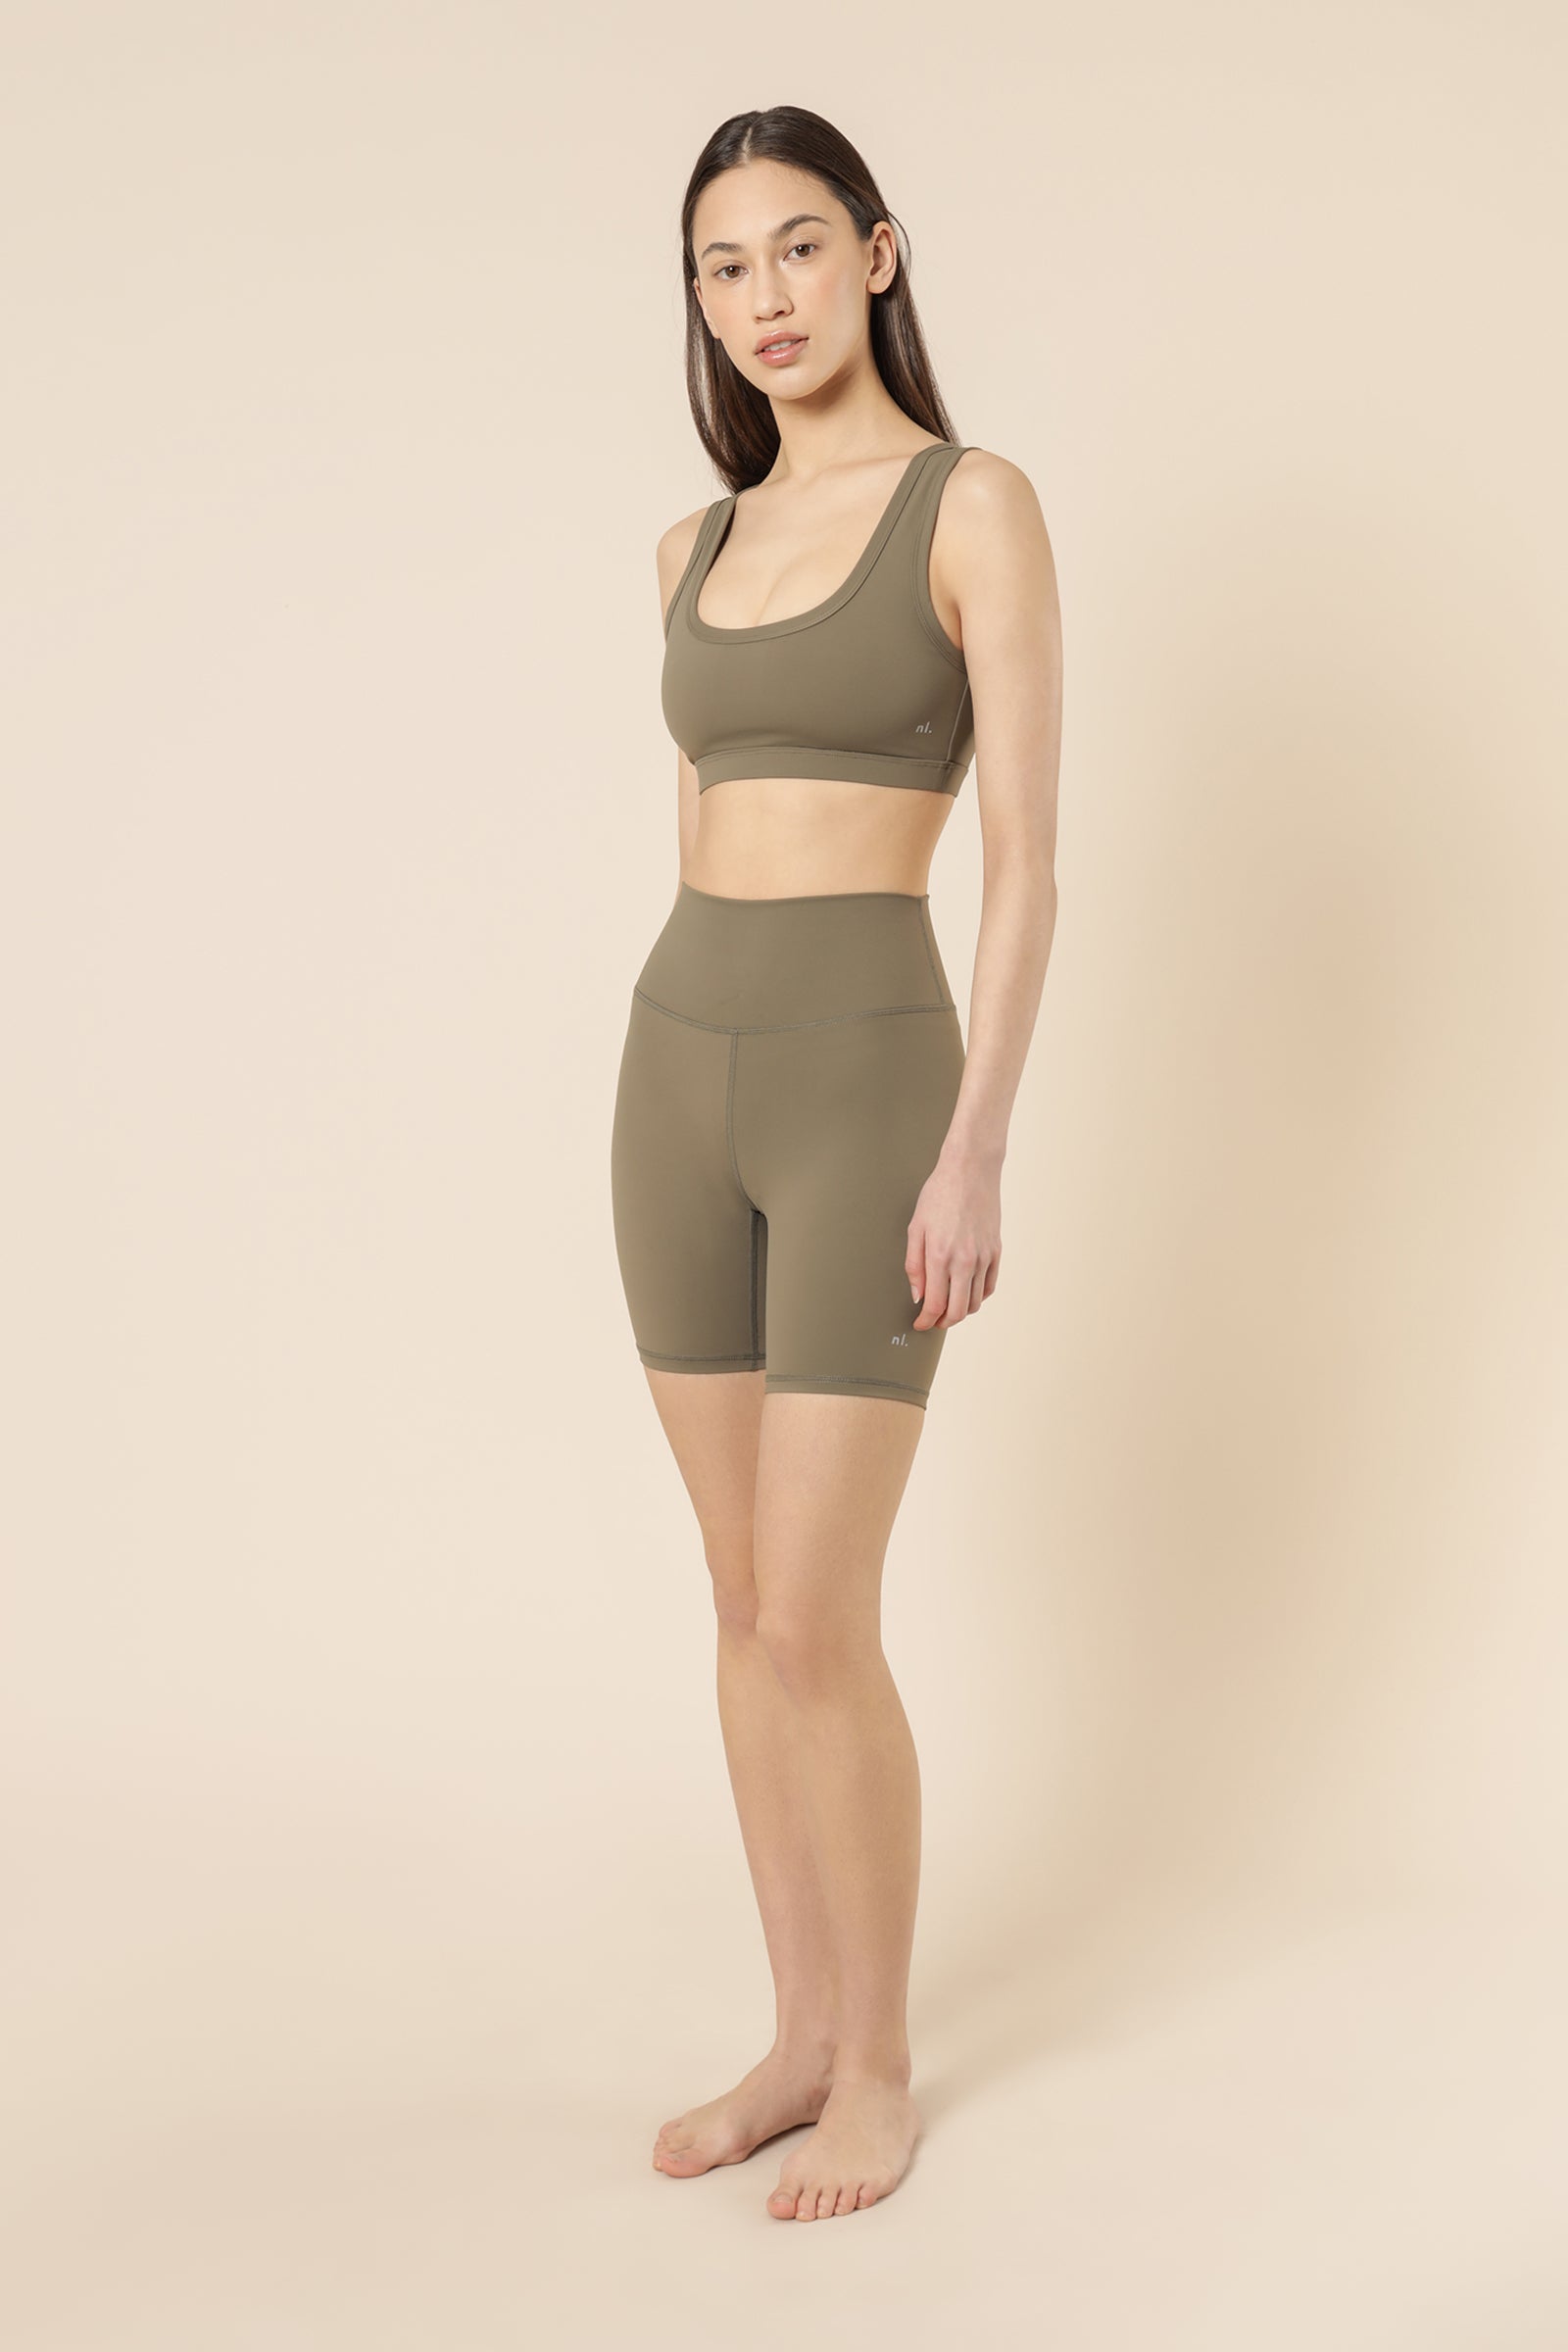 Nude Lucy nude active bike short olive shorts